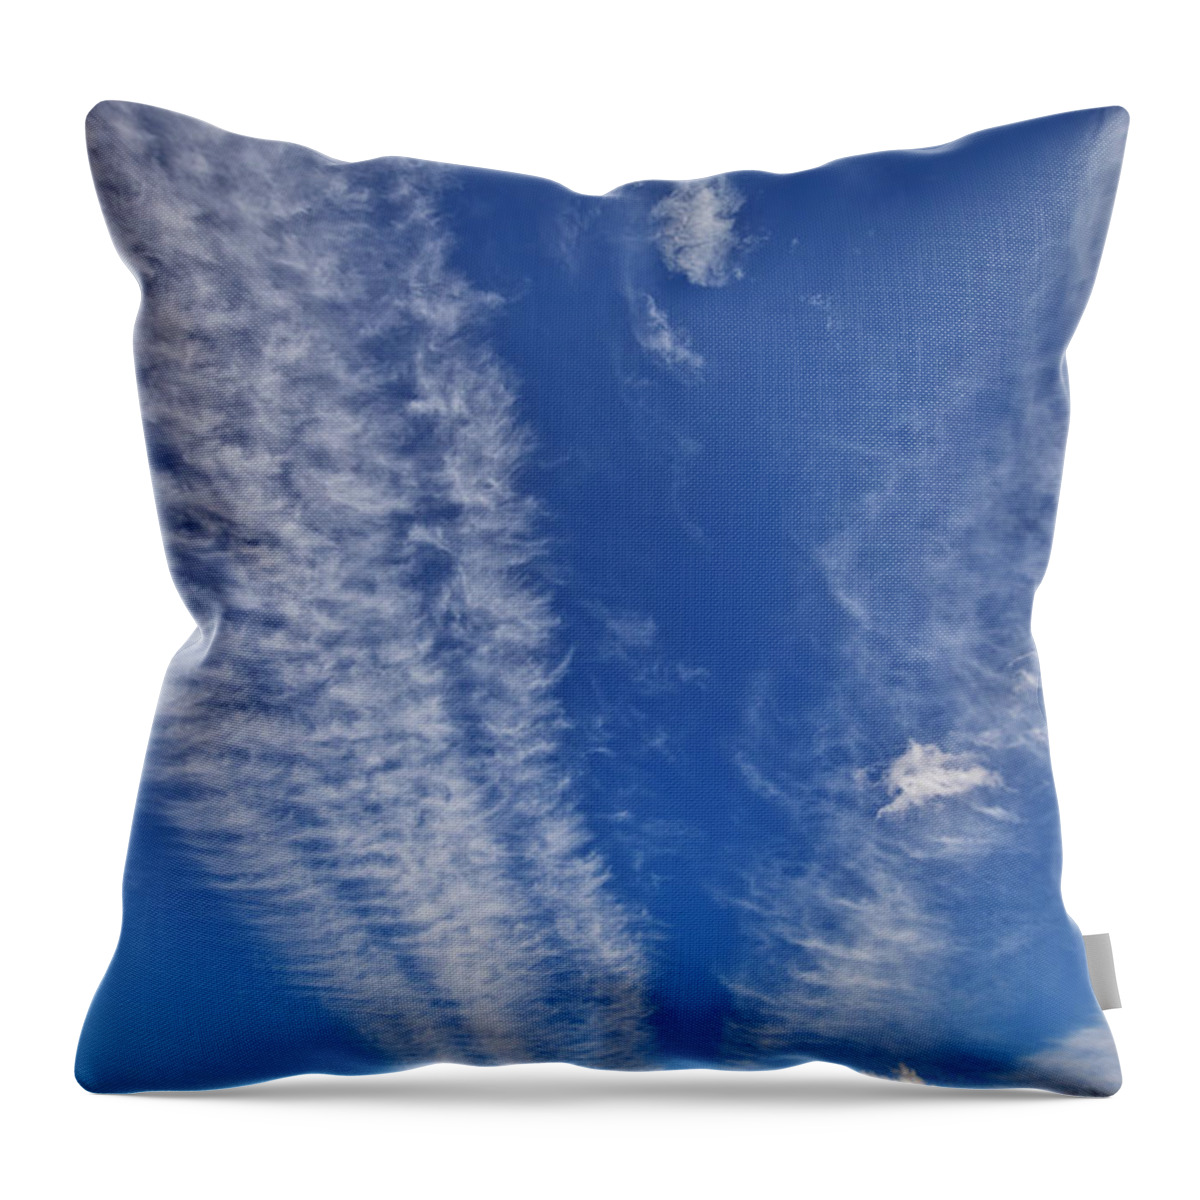 00559302 Throw Pillow featuring the photograph Contrails And Cumulus Cloud New Mexico by Yva Momatiuk John Eastcott